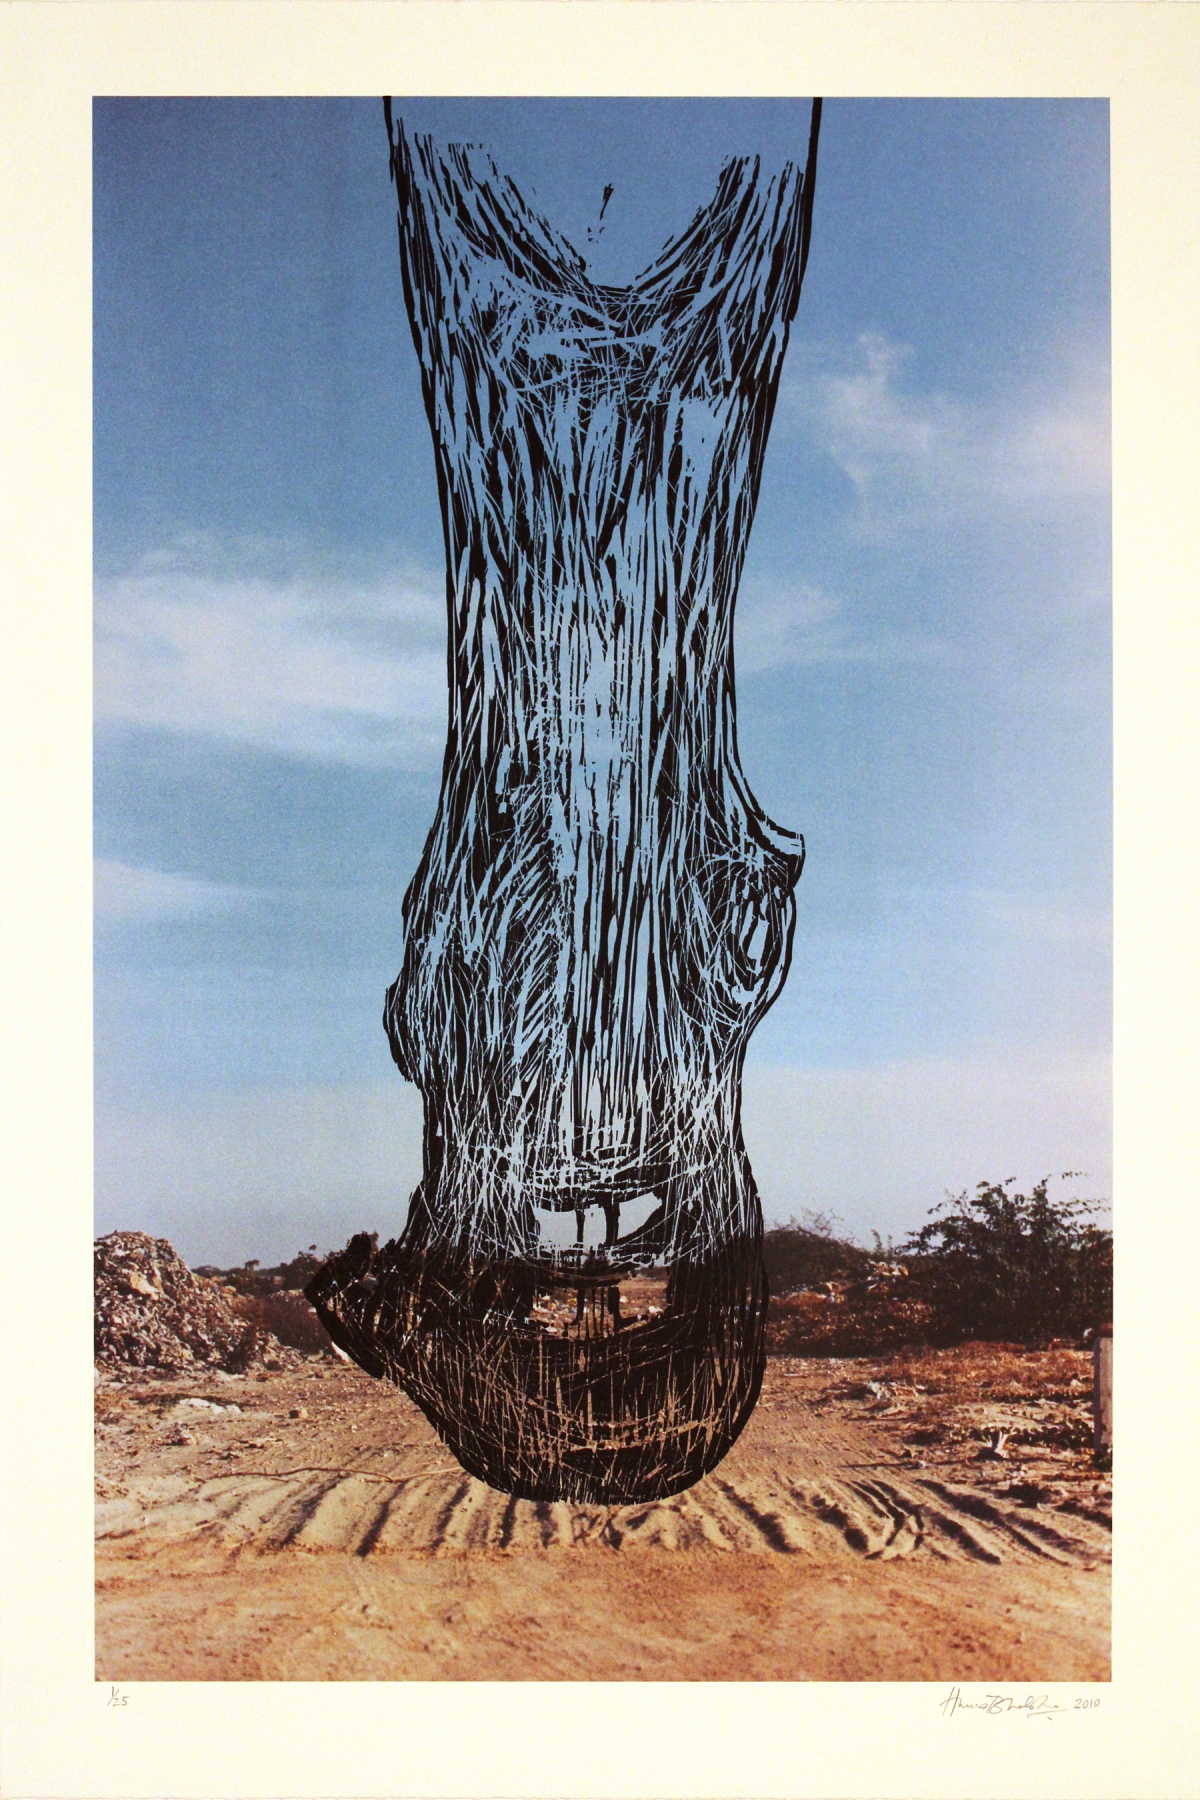 Huma Bhabha
Untitled, 2010
Woodcut over lithograph
38 1/2 x 26 inches (97.8 x 66 cm)
Edition of 25 + proofs

Inquire